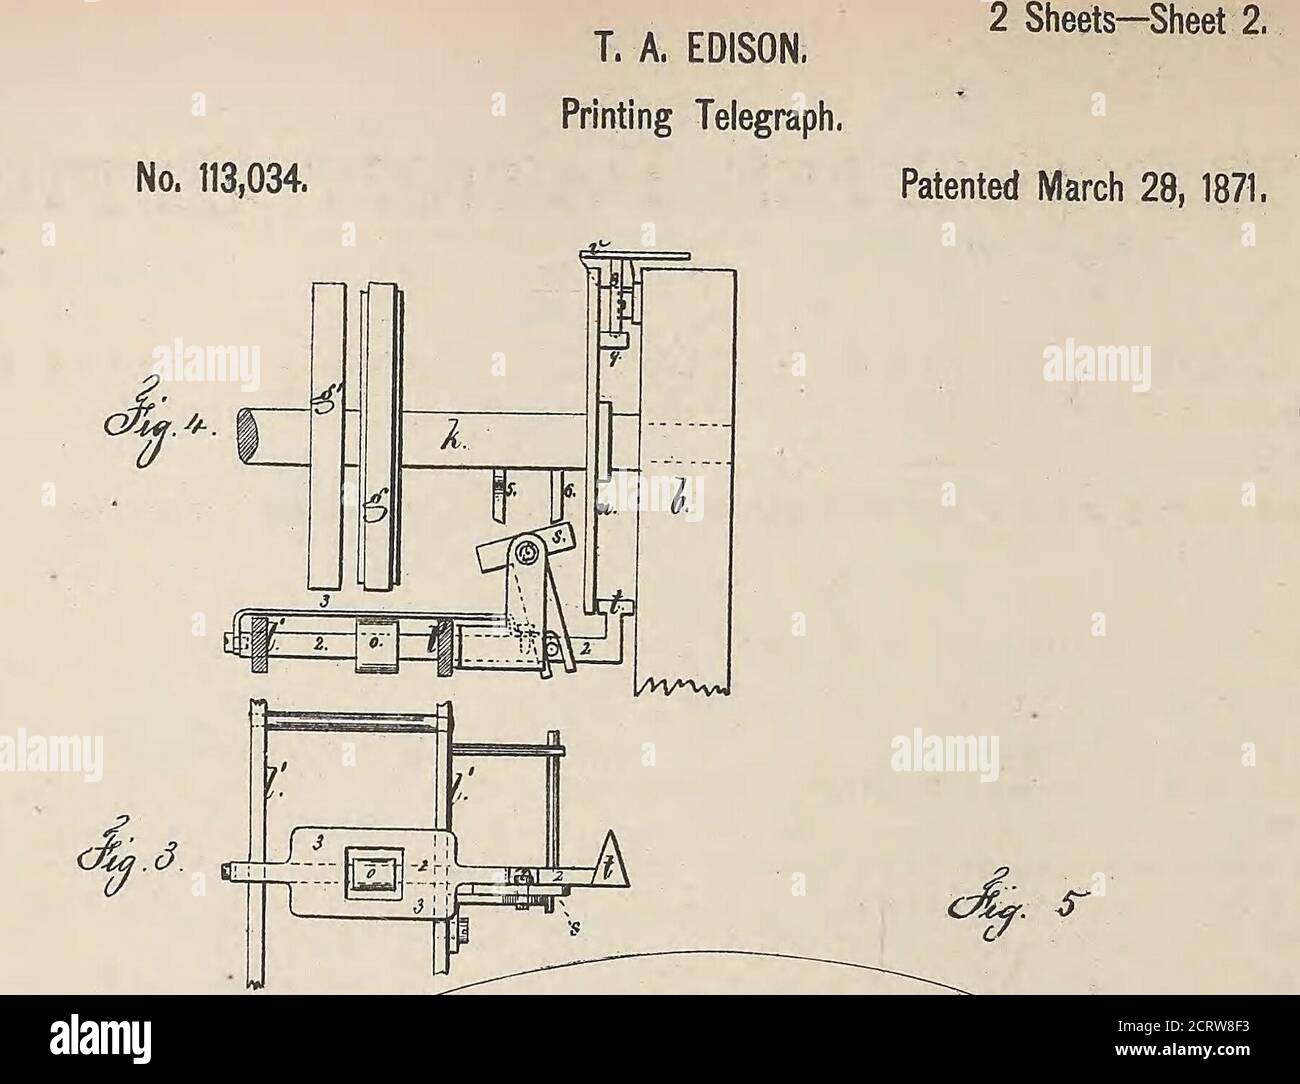 . Collection of United States patents granted to Thomas A. Edison, 1869-1884 . N. PETERS, PHOTO-LITHOGRAPHER, WASHINGTON, D. C.. United States Patent Office. THOMAS A. EDISON, OF NEWARK, NEW JEESEY, ASSIGNOR TO THE GOLDAND STOCK TELEGRAPH COMPANY, OF NEW YORK CITY. IMPROVEMENT IN PRINTING-TELEGRAPH APPARATUS. Specification forming part of Letters Patent No. 113,034, dated March 28, 1871. To all whom it may concern: Be it known that I, Thomas A. Edison, ofNewark, in the county of Essex and State ofNew Jersey, nave invented an Improvementin Printing-Telegraphs, and the following isdeclared to be Stock Photo